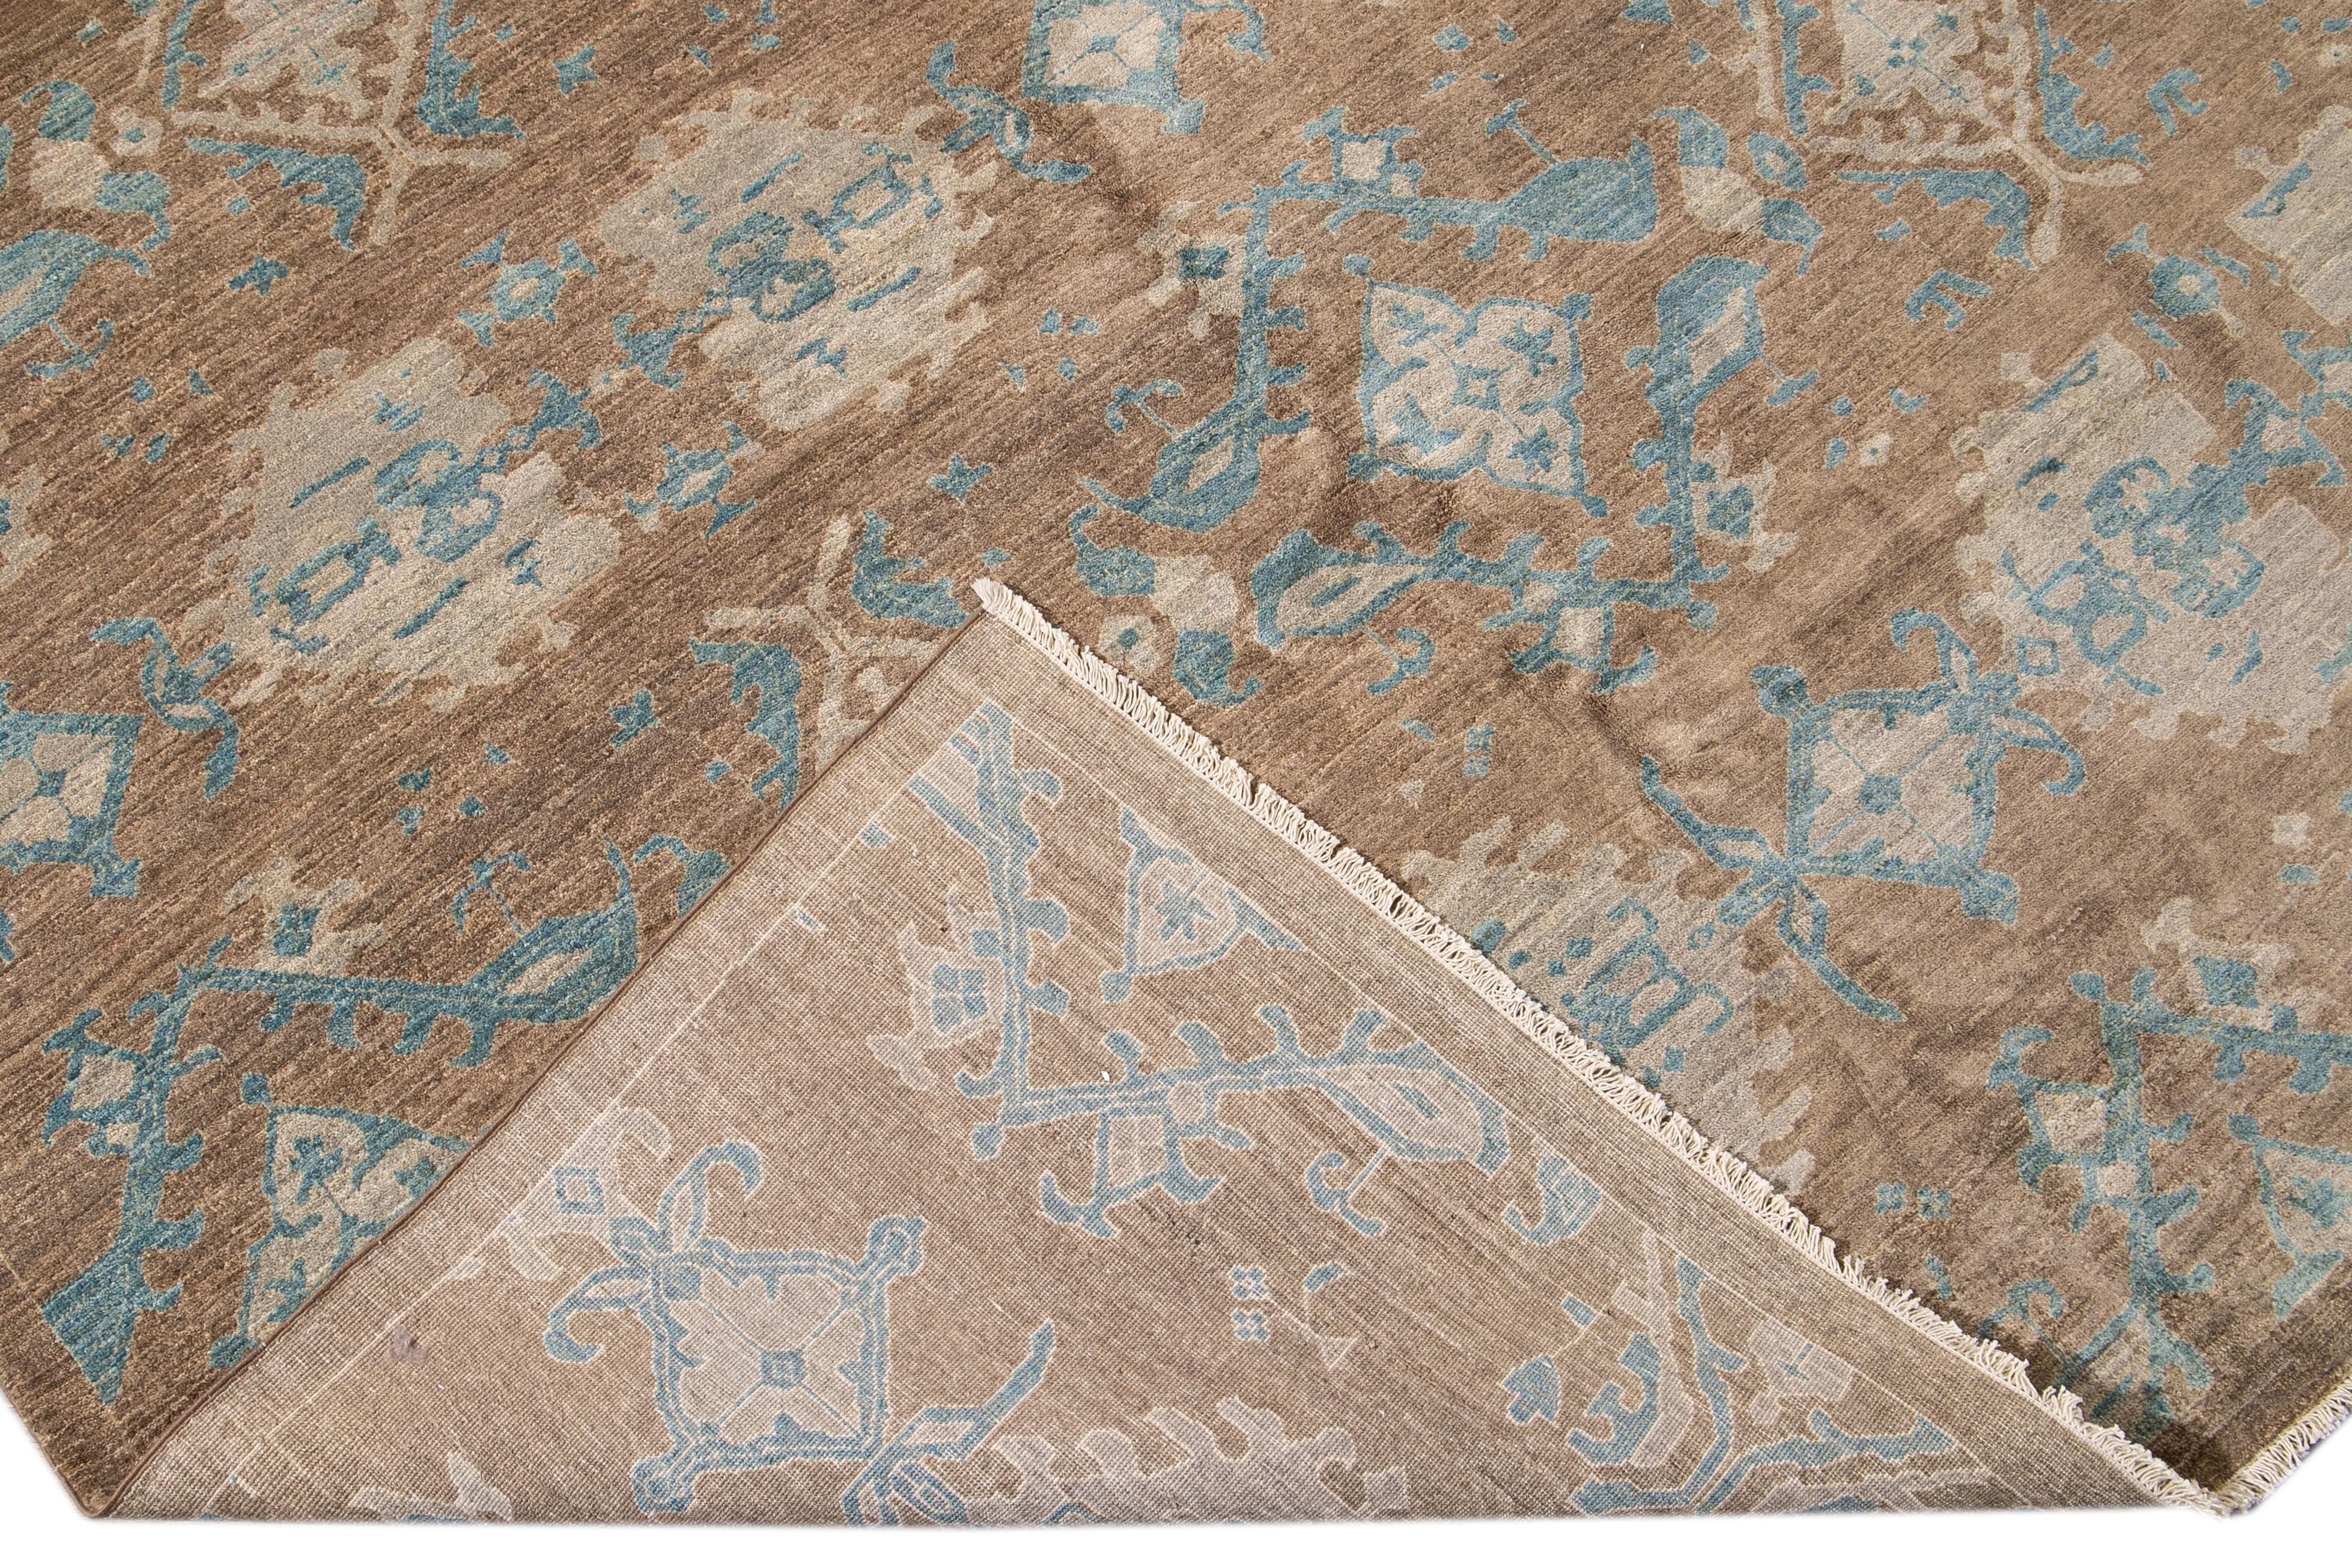 Beautiful modern oversize Persian Tabriz hand-knotted wool rug with a brown field. This Tabriz has accents of blue and beige in a gorgeous all-over geometric floral pattern design.

This rug measures: 12'1